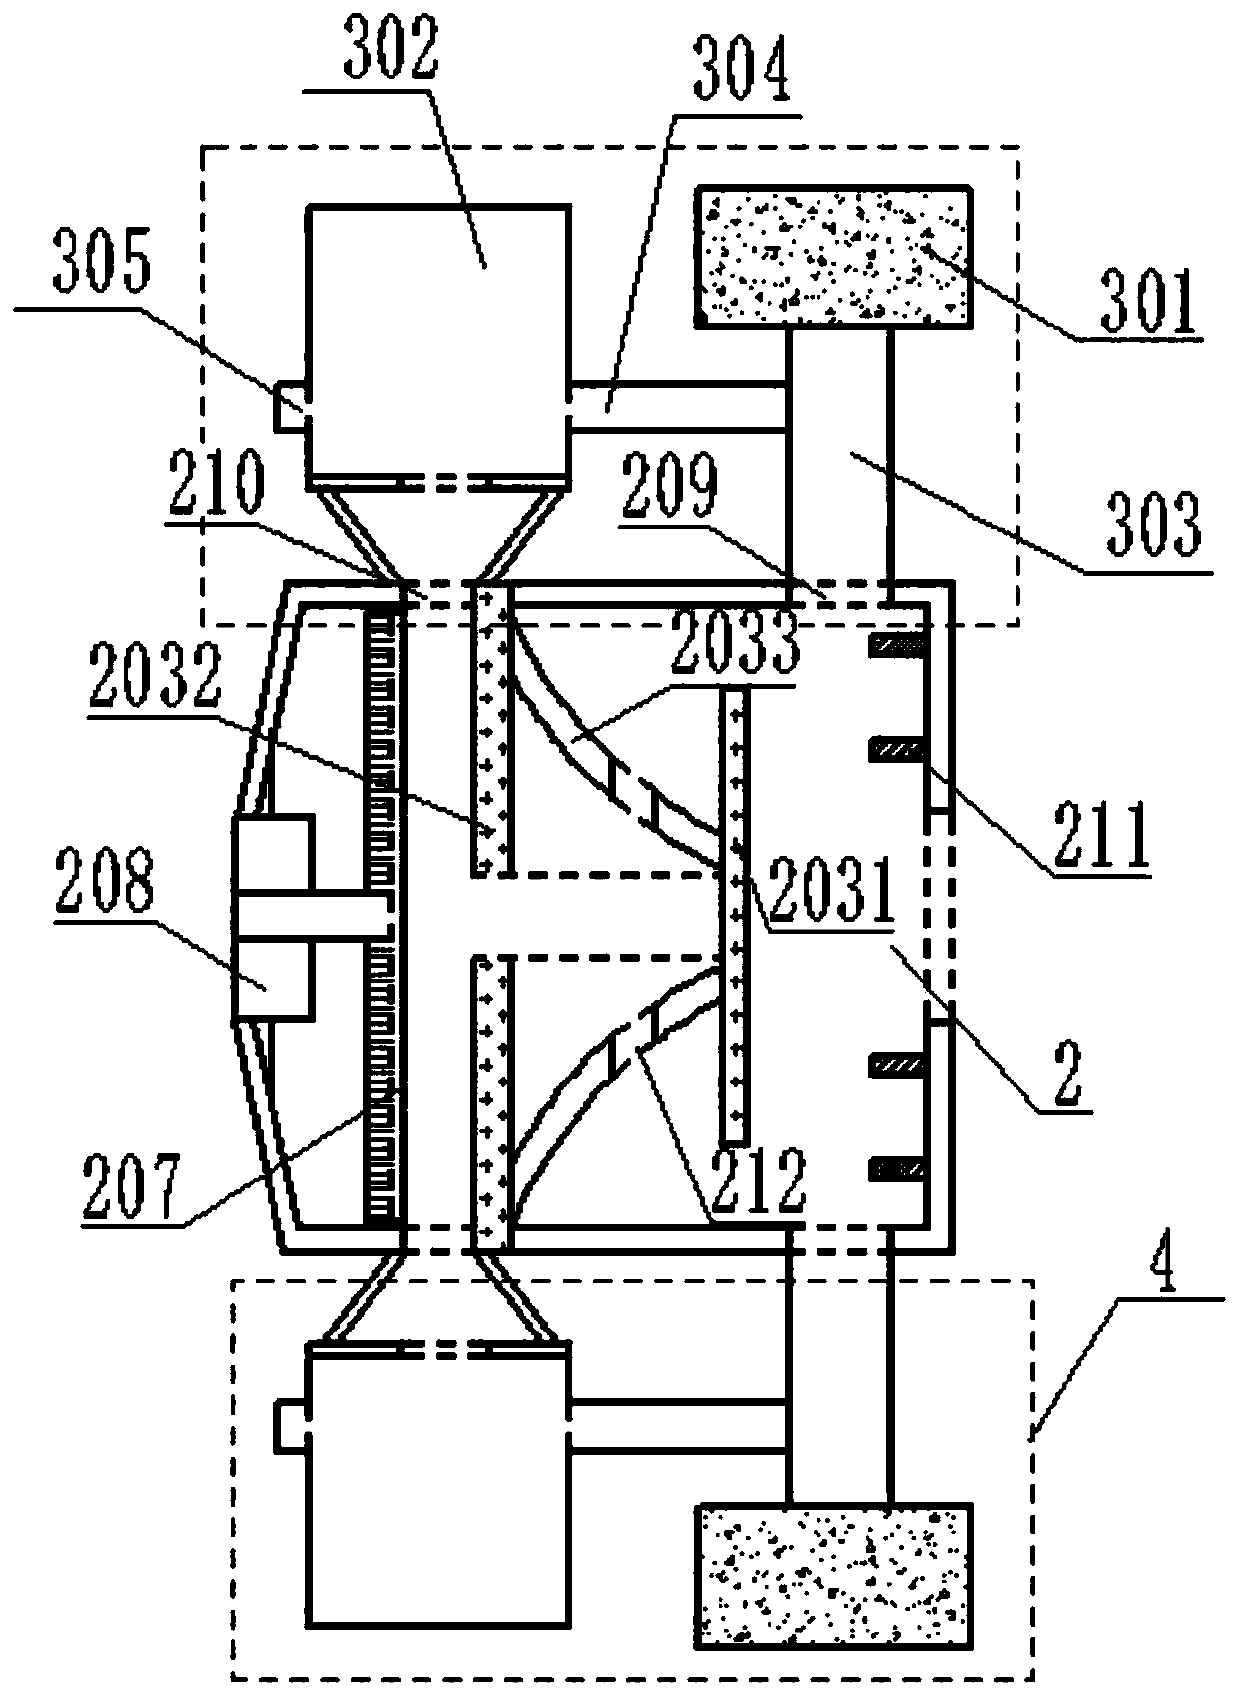 Shielding motor for pump capable of transporting liquid containing particles